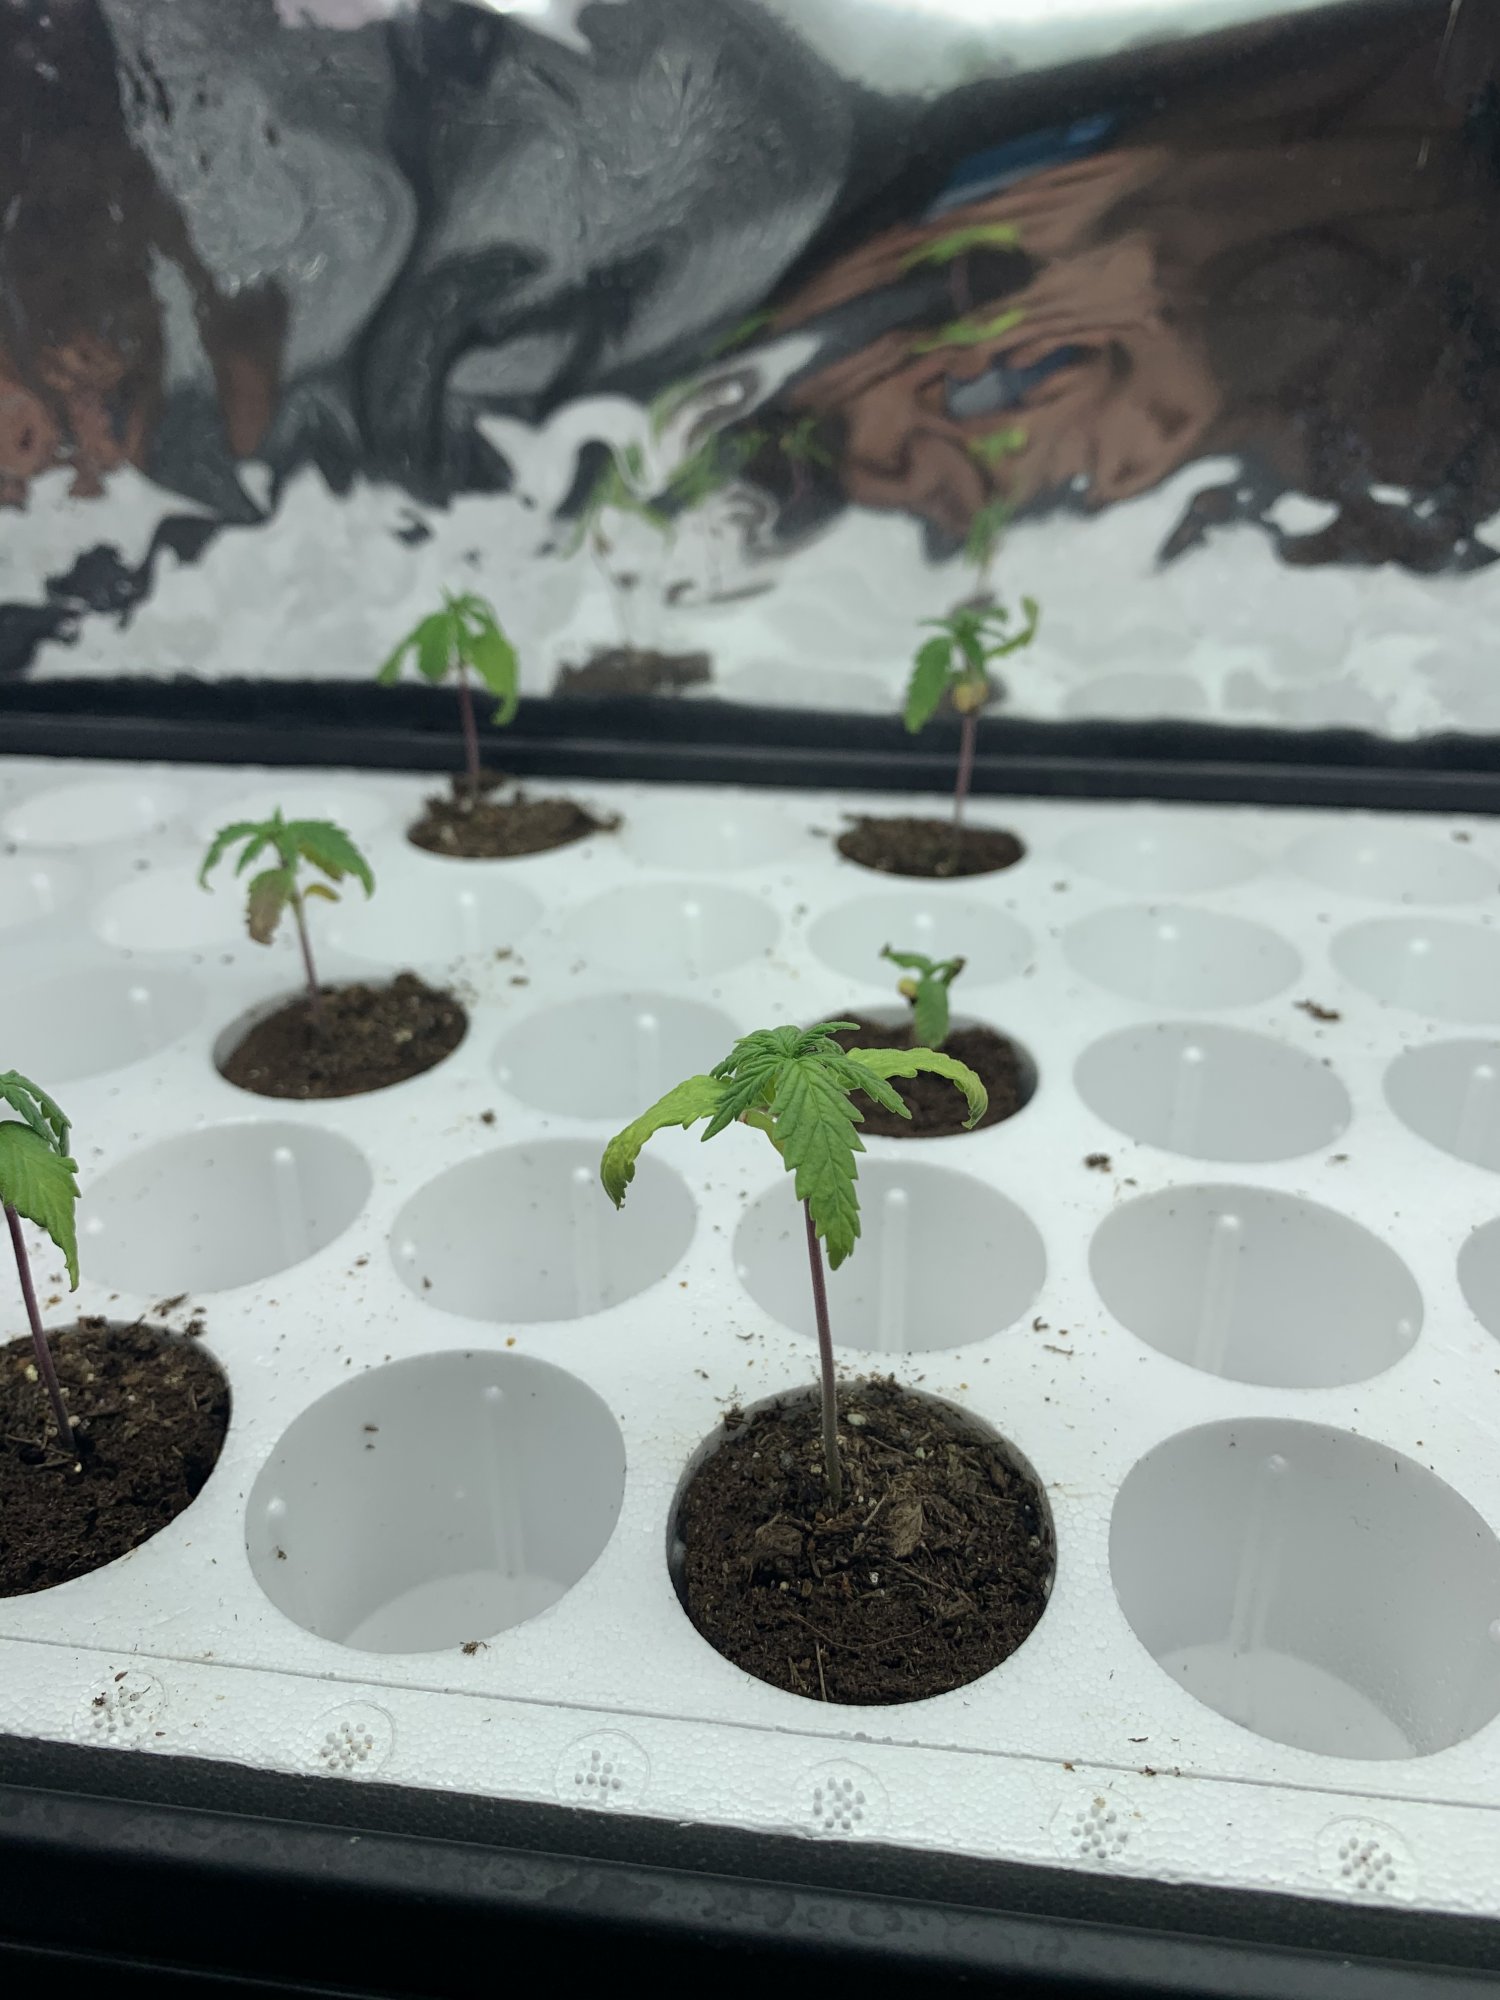 Whats wrong with my seedlings